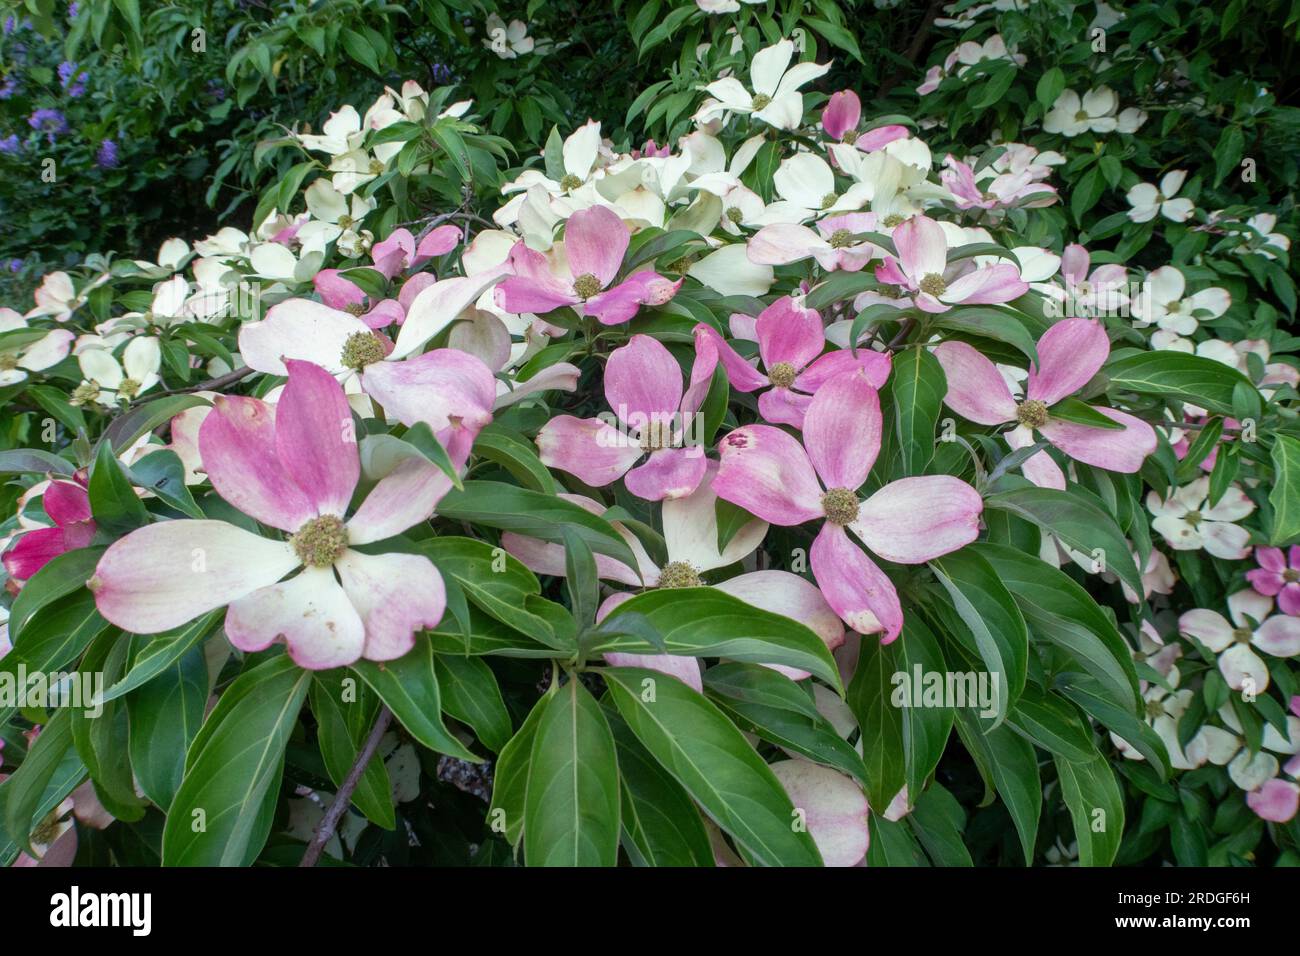 As the bracts (flowers) age, they slowly turn from cream to pink on Cornus Capitata. On a tree in Devon, England. Dogwood tree. Stock Photo